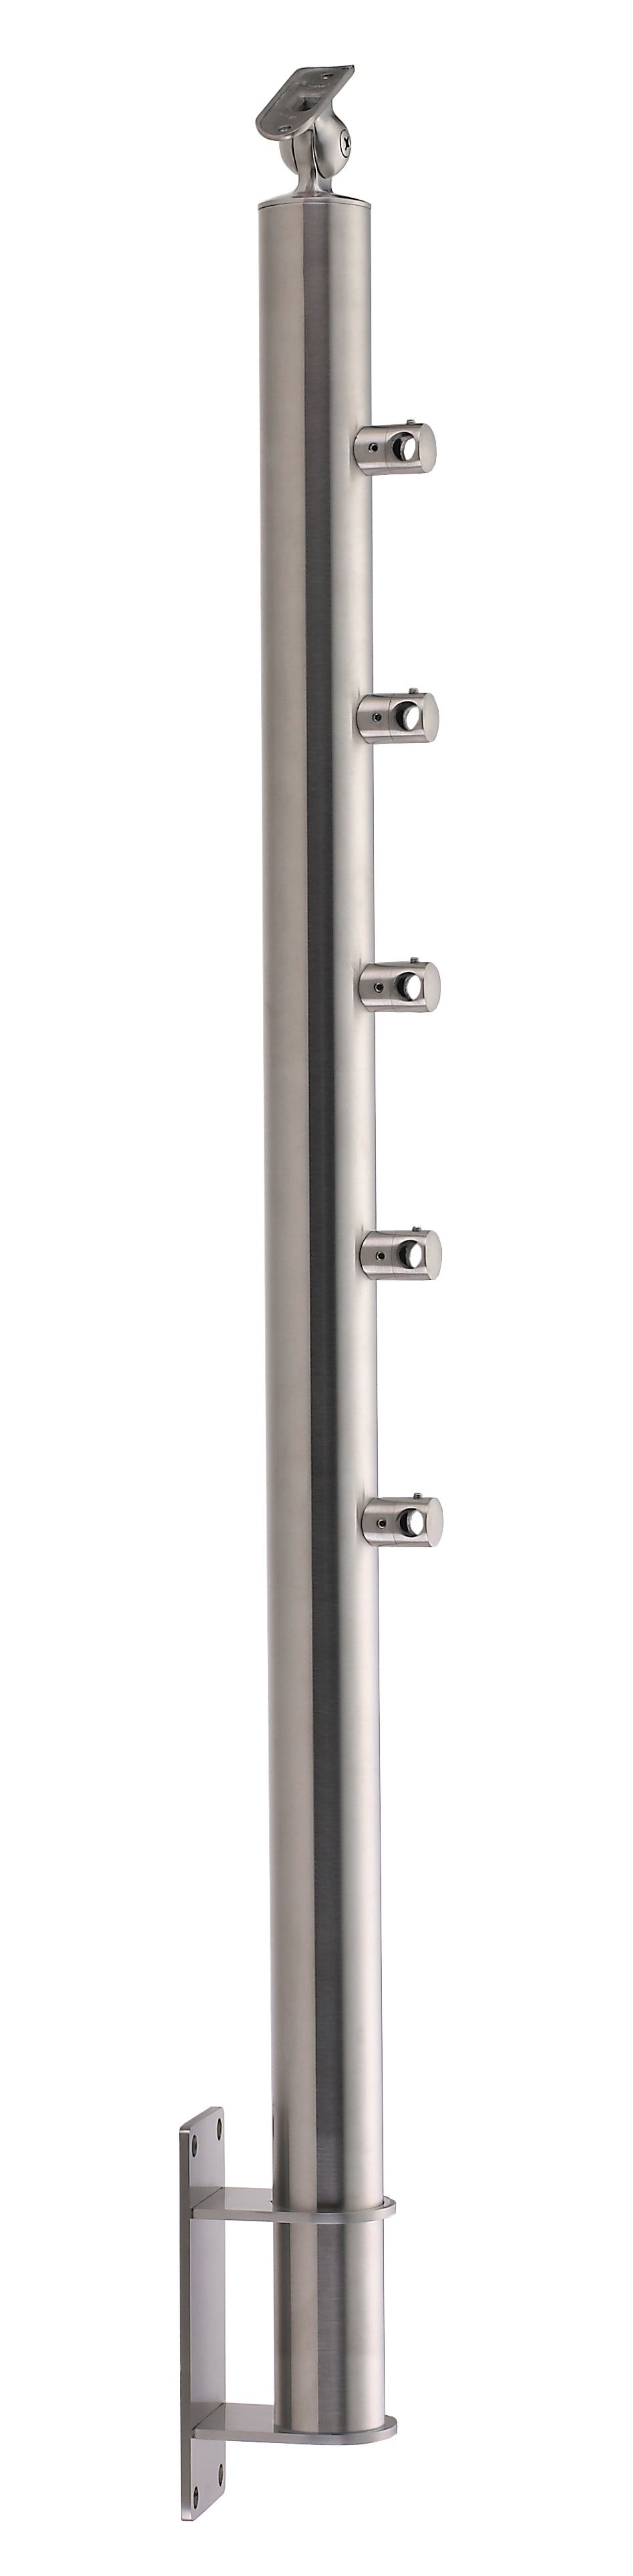 Stainless Steel Balustrade Posts - Tubular - SS:2020559A